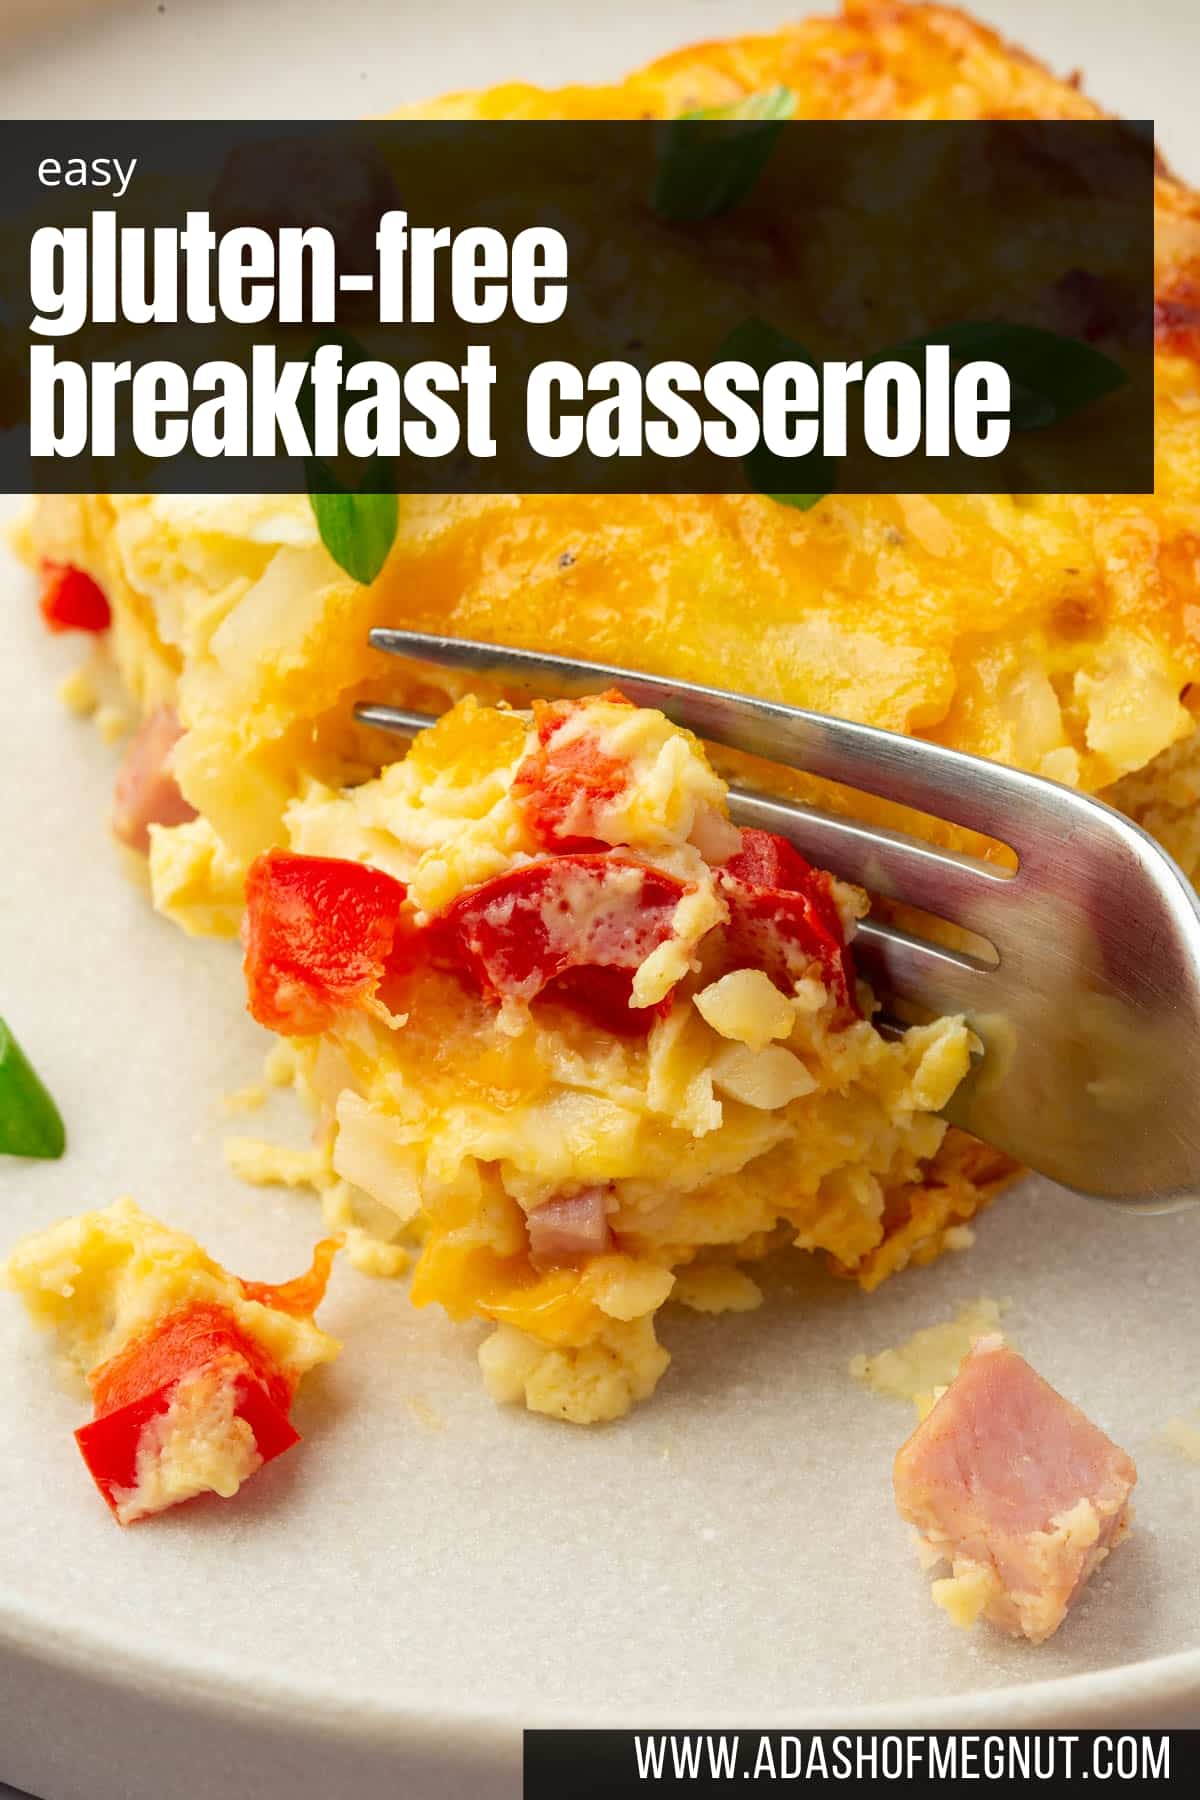 A close up of a fork cutting into a slice of breakfast casserole with ham and red bell pepper.